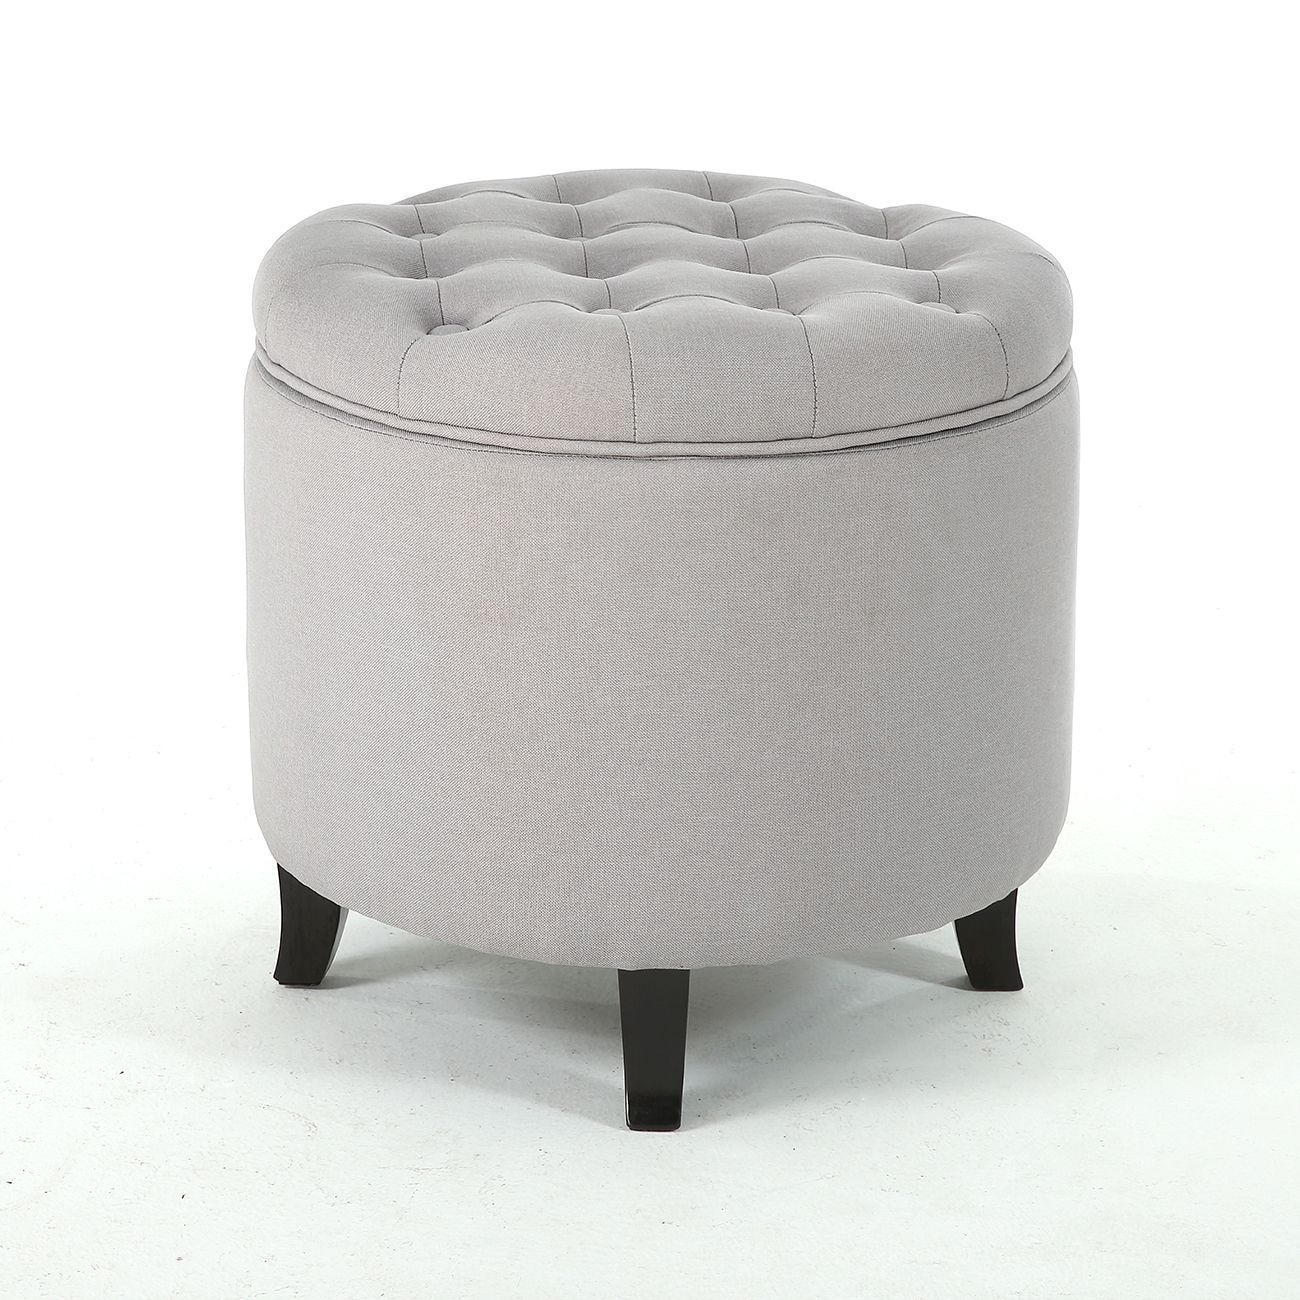 Classic Storage Ottoman Seat Nailhead Trim Large Round Tufted Table Within Light Gray Fabric Tufted Round Storage Ottomans (View 6 of 20)